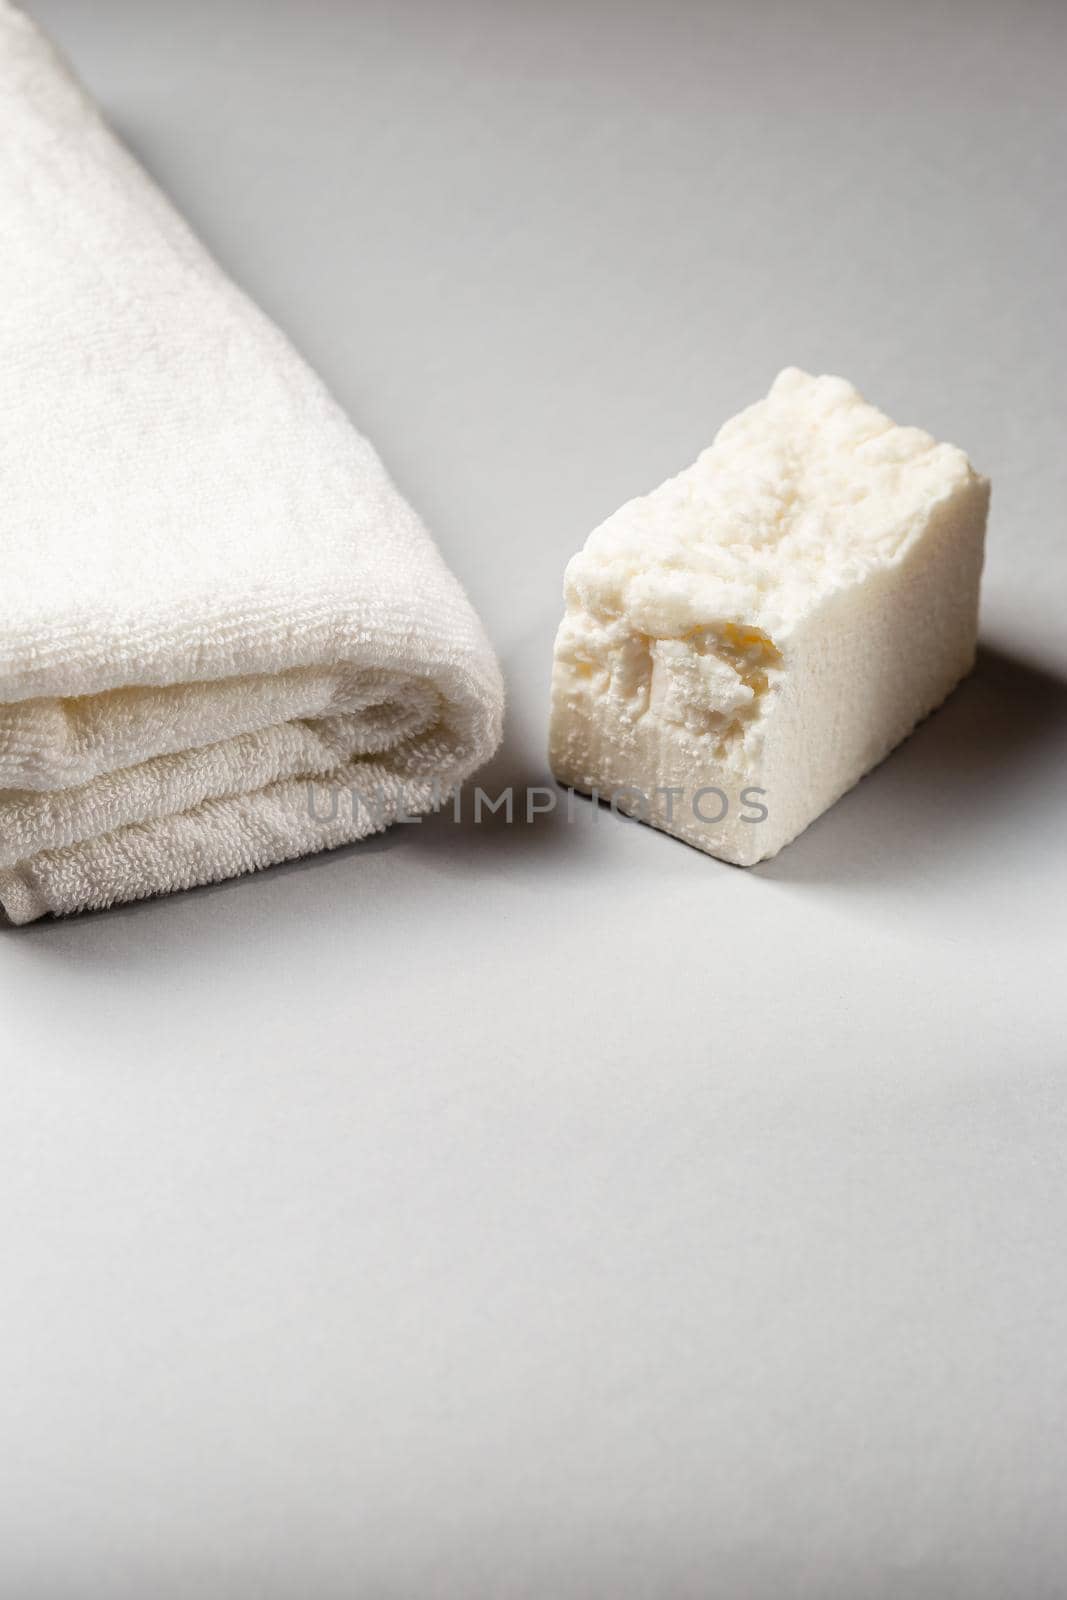 Homemade laundry detergent. Washing solid soap bar. Eco-friendly Sustainable lifestyle concept